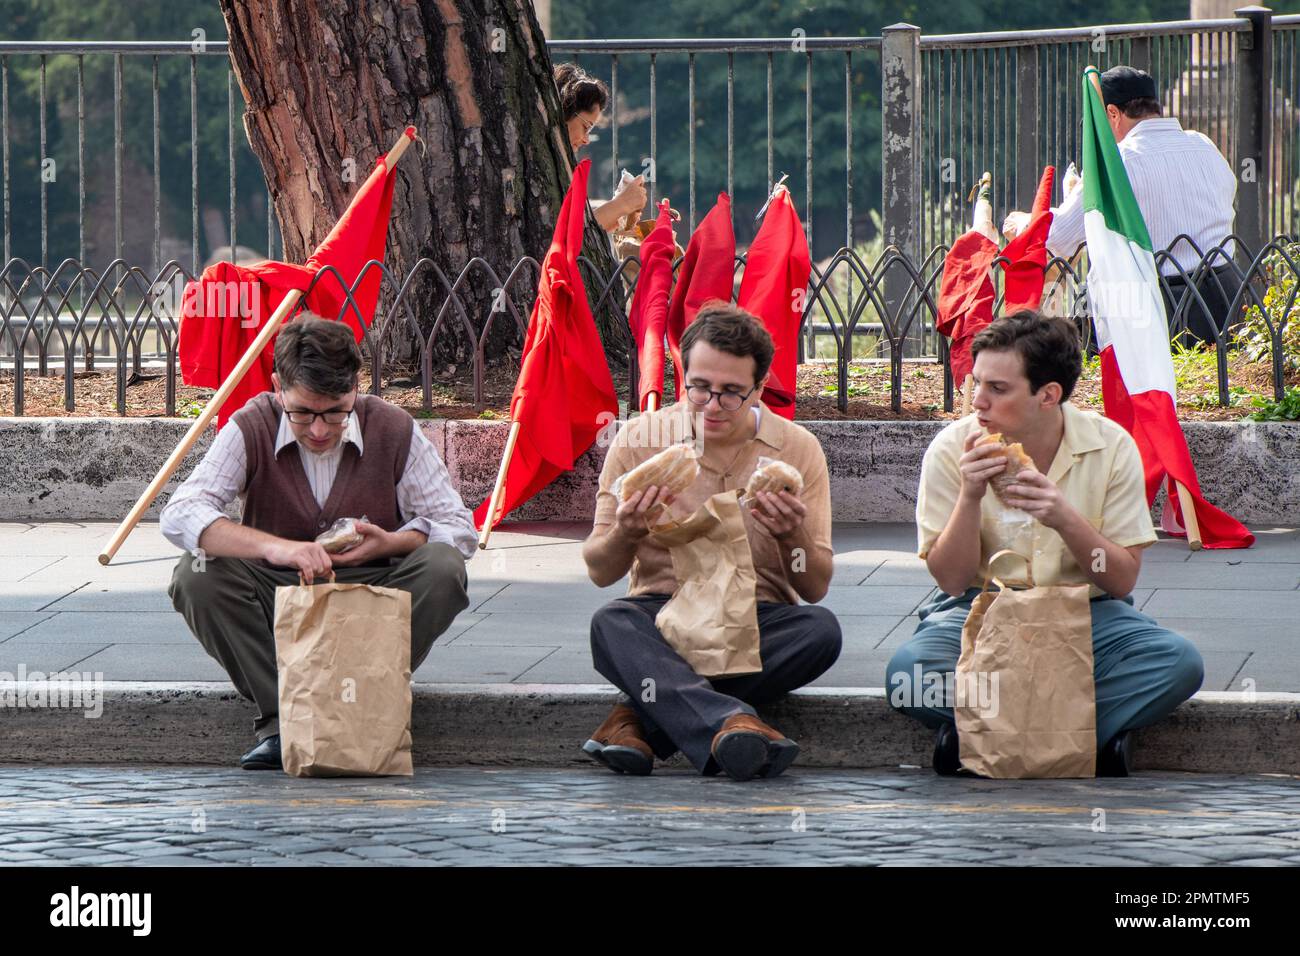 Some actors take a break during the shooting. The new film 'Il sol dell'avvenire' (The sun of the future) by Italian director Nanni Moretti will compete for the Palme d'Or at the 2023 Cannes Film Festival. Set between the 1950s and 1970s in the world of circus and cinema, it will be released in Italian cinemas on 20 April 2023 distributed by 01 Distribution, before moving onto the Croisette in May. The director will turn 70 on August 19, 2023. Stock Photo